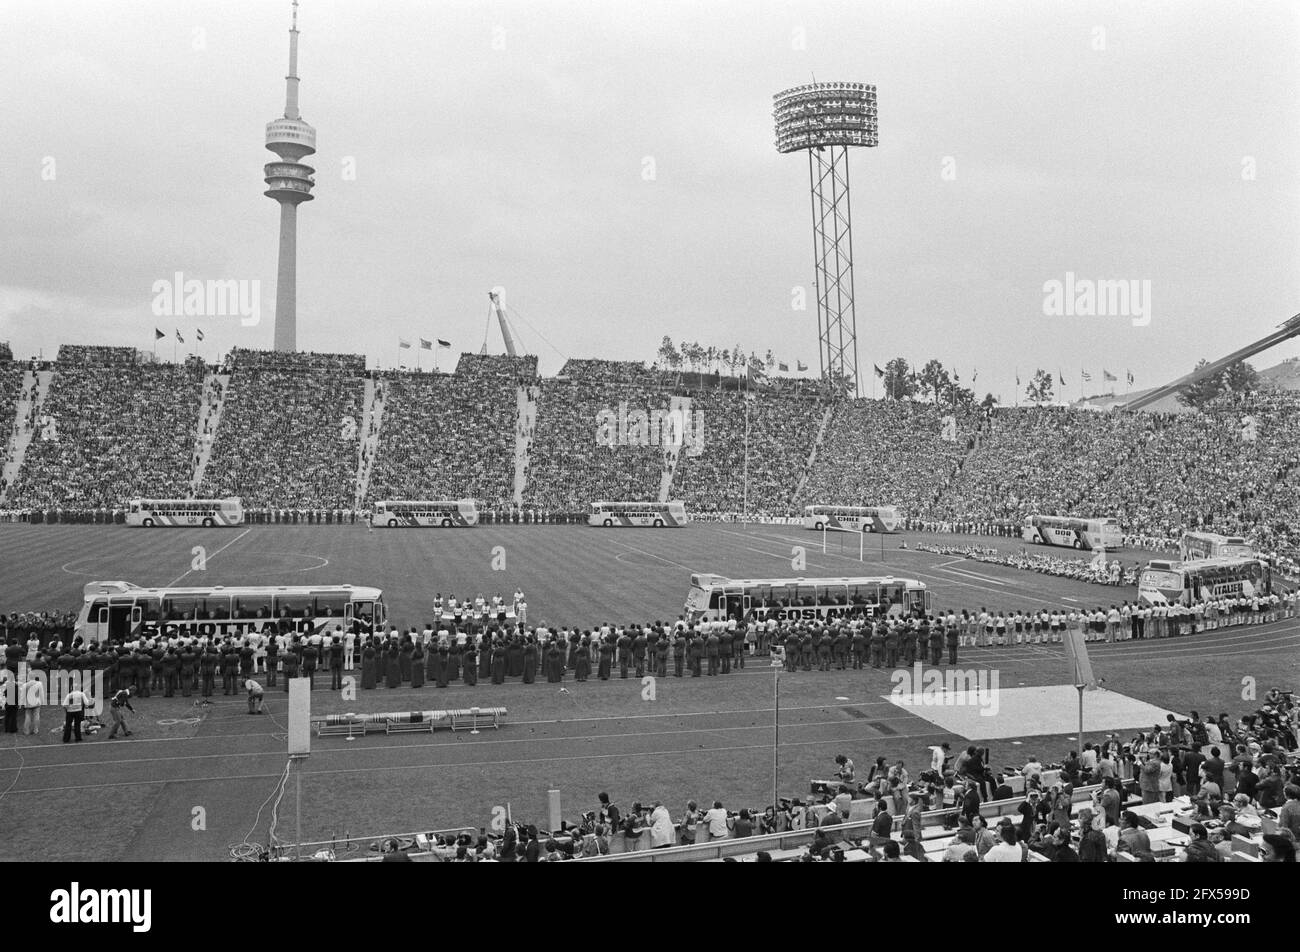 Finals World Cup 1974 in Munich, West Germany v. Netherlands 2-1; closing ceremony, July 7, 1974, finals, sports, soccer, world championships, The Netherlands, 20th century press agency photo, news to remember, documentary, historic photography 1945-1990, visual stories, human history of the Twentieth Century, capturing moments in time Stock Photo